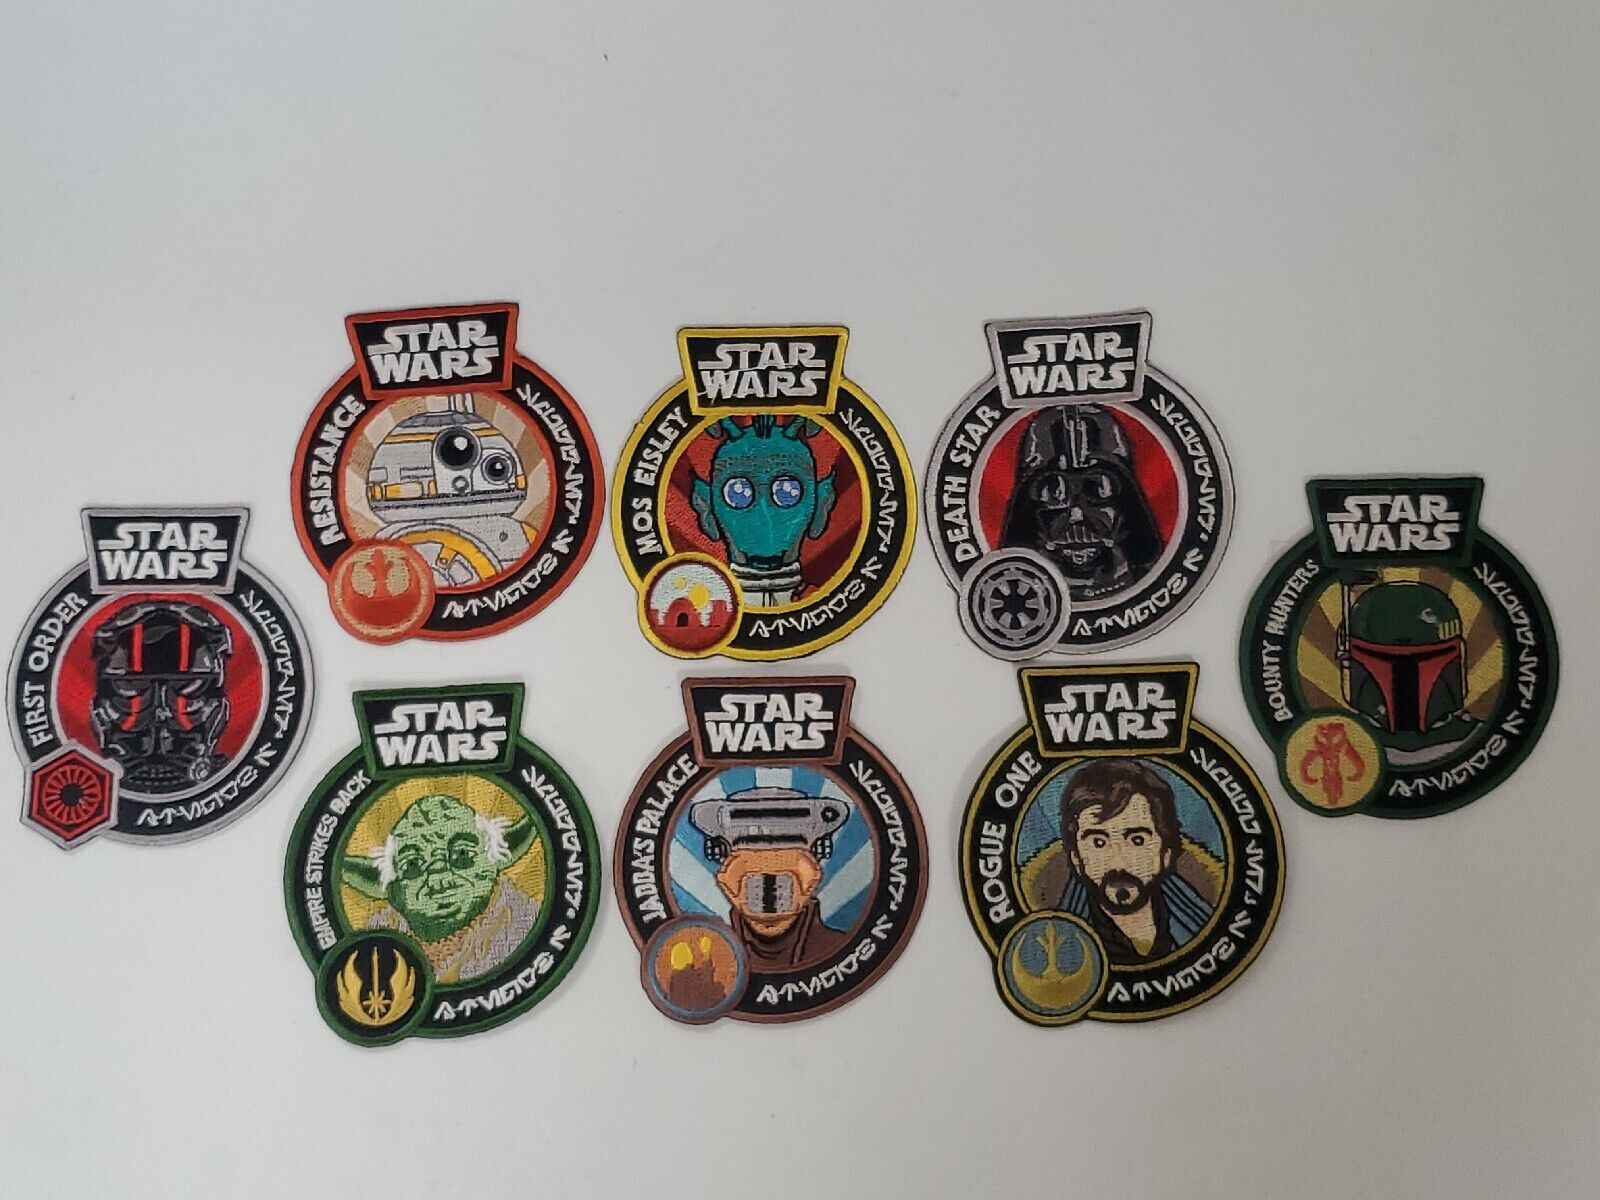 AUTHENTIC Star Wars Lot of 8 Patches Mos Eisley Resistance, Dead Star & More NEW